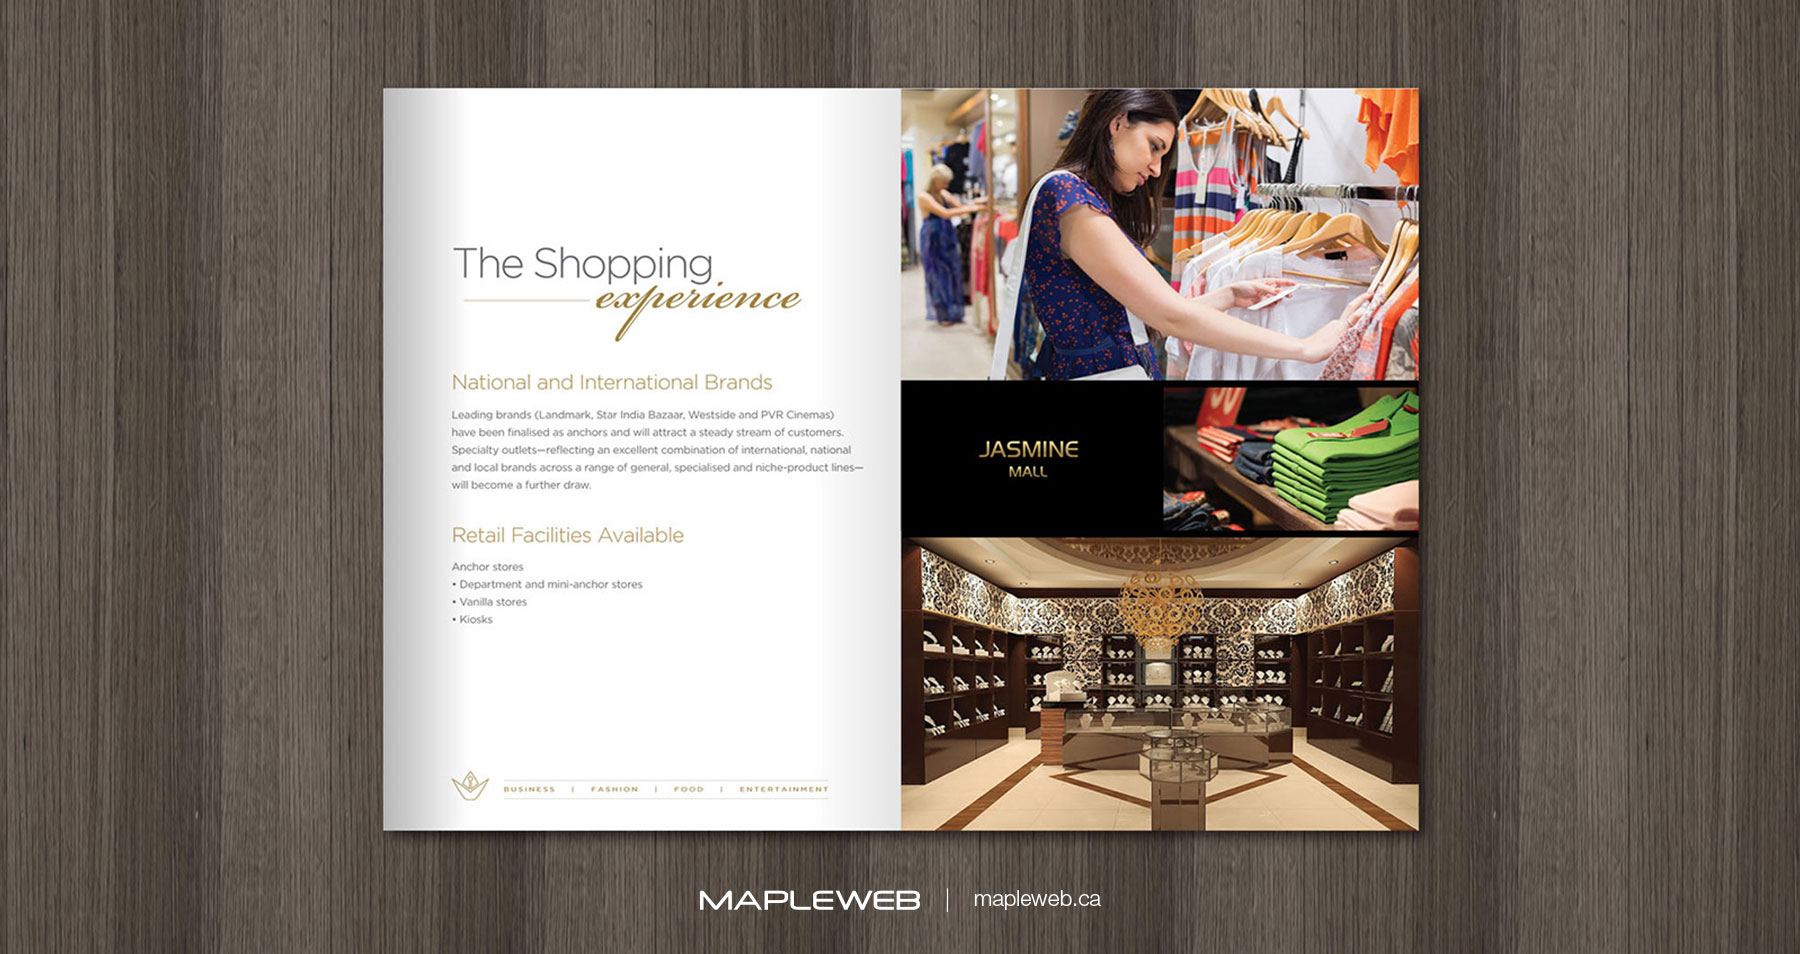 Jasmine Mall Brand design by Mapleweb Brochure Displaying Jewelry and Female Clothes